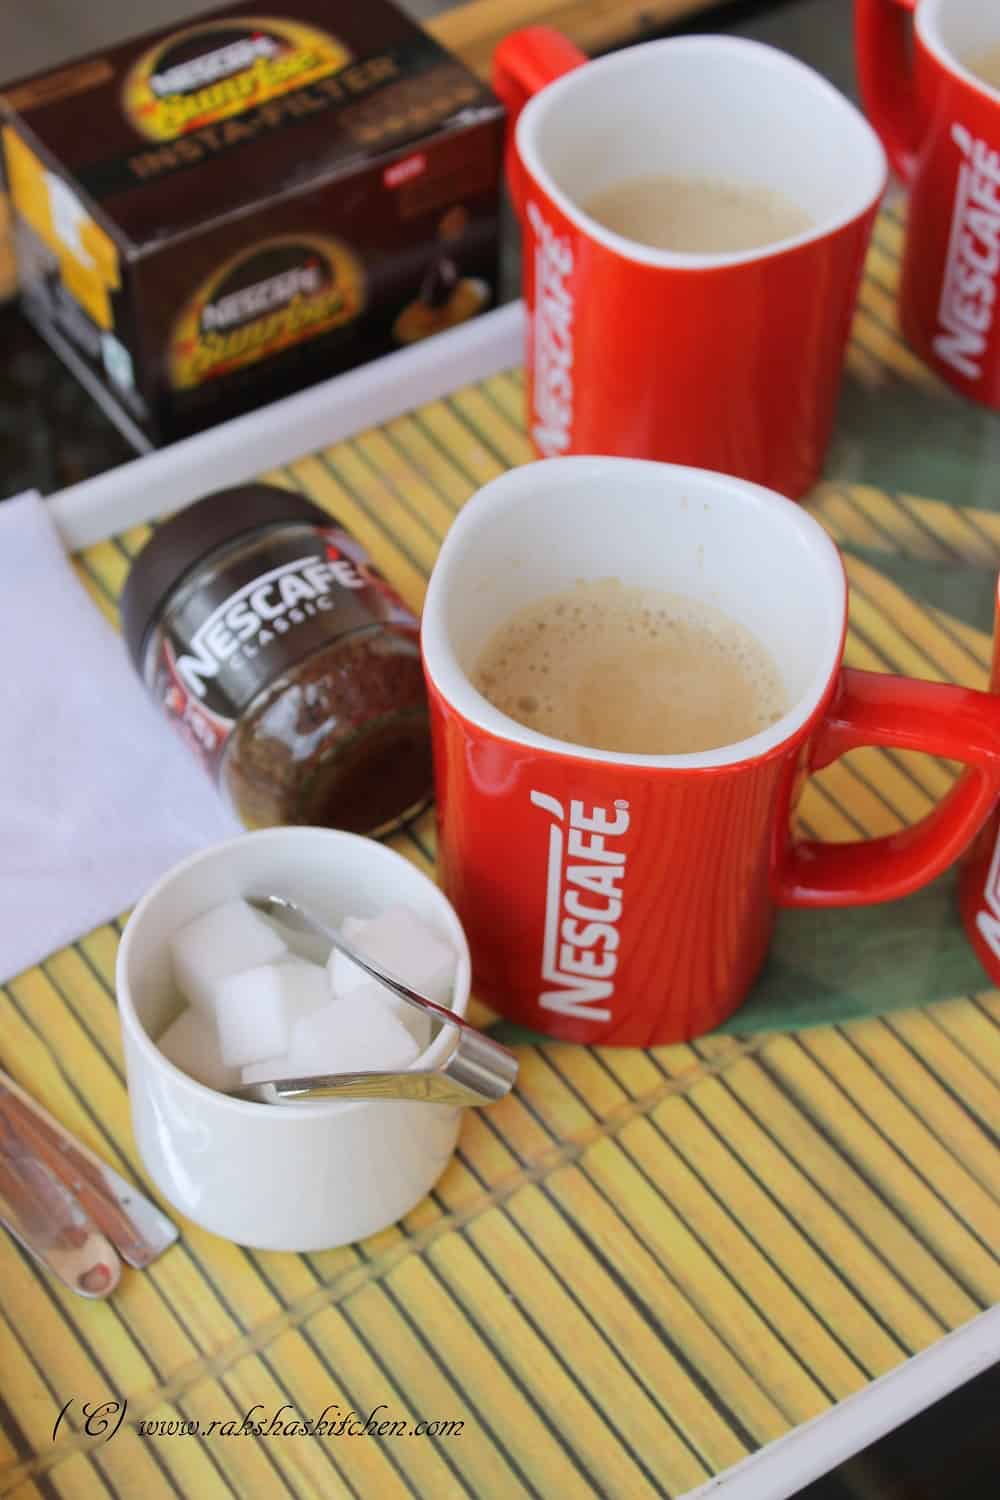 Coffee Granita with Nescafe Clasico - Nibbles and Feasts